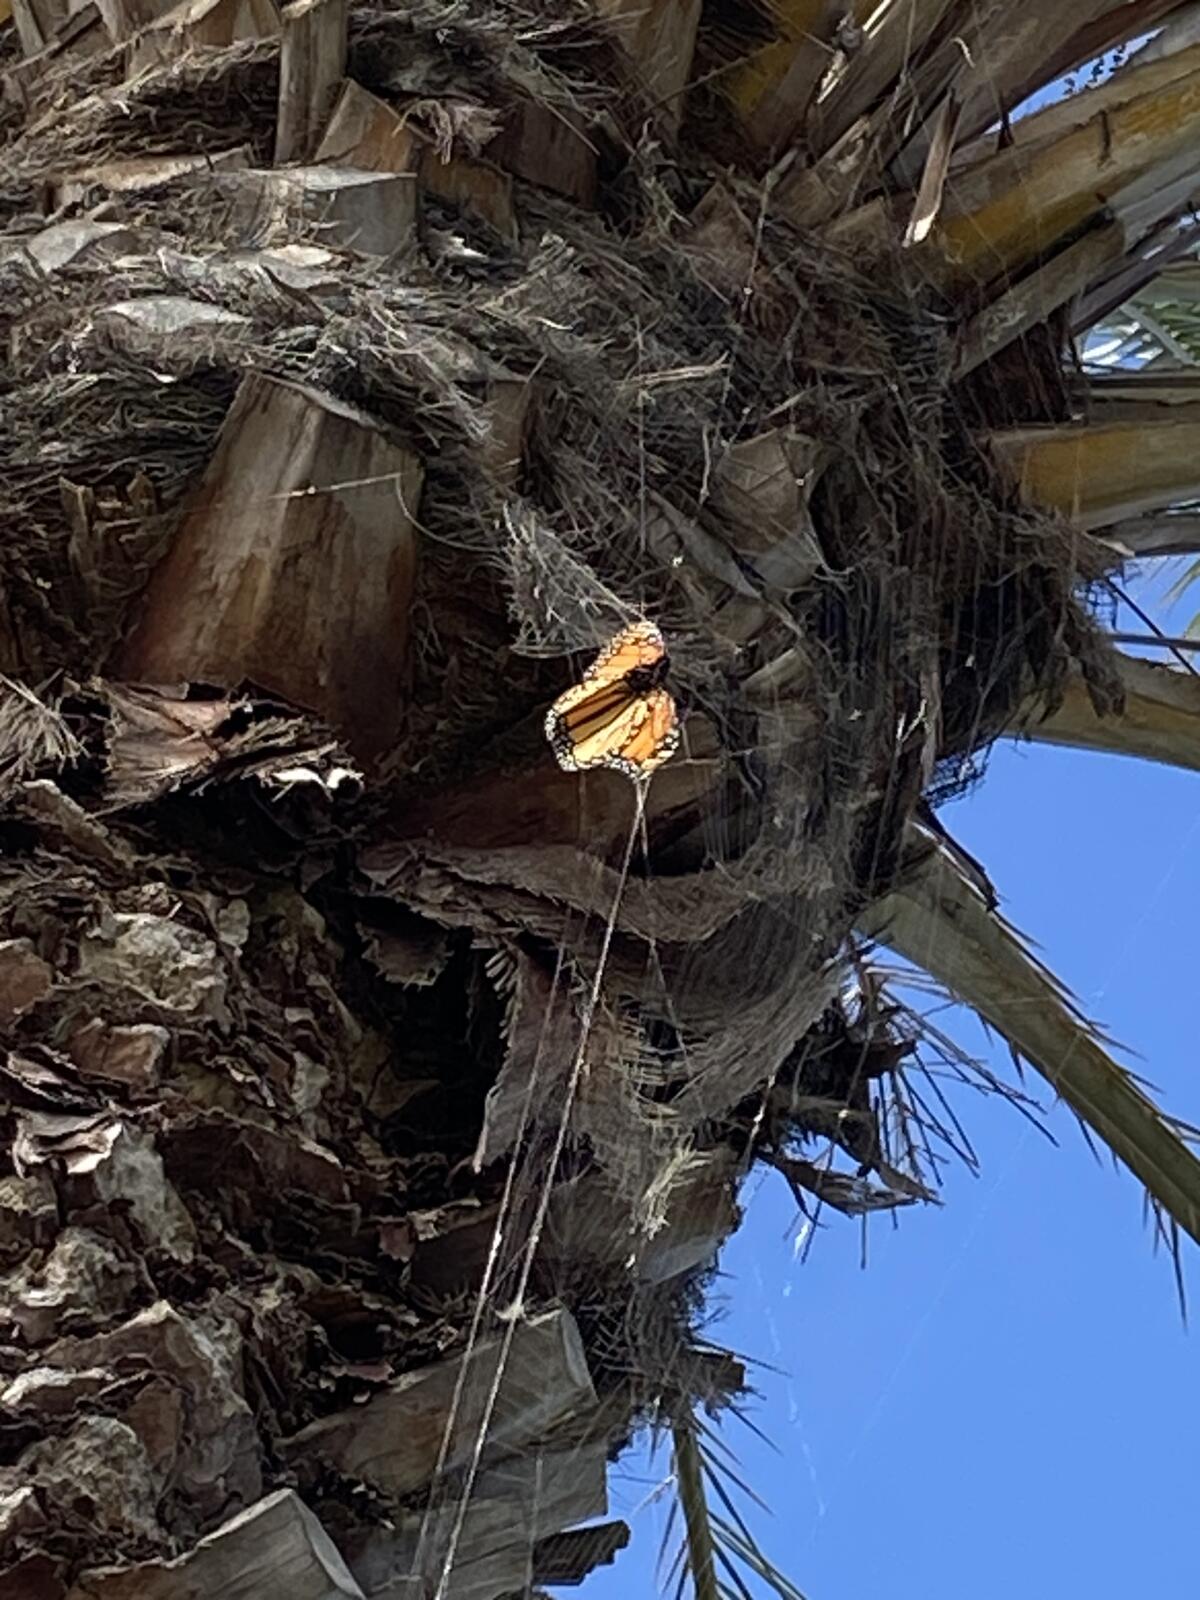 A monarch is caught in a spider web in a palm tree above Patrice Apodaca's neighbor's house.